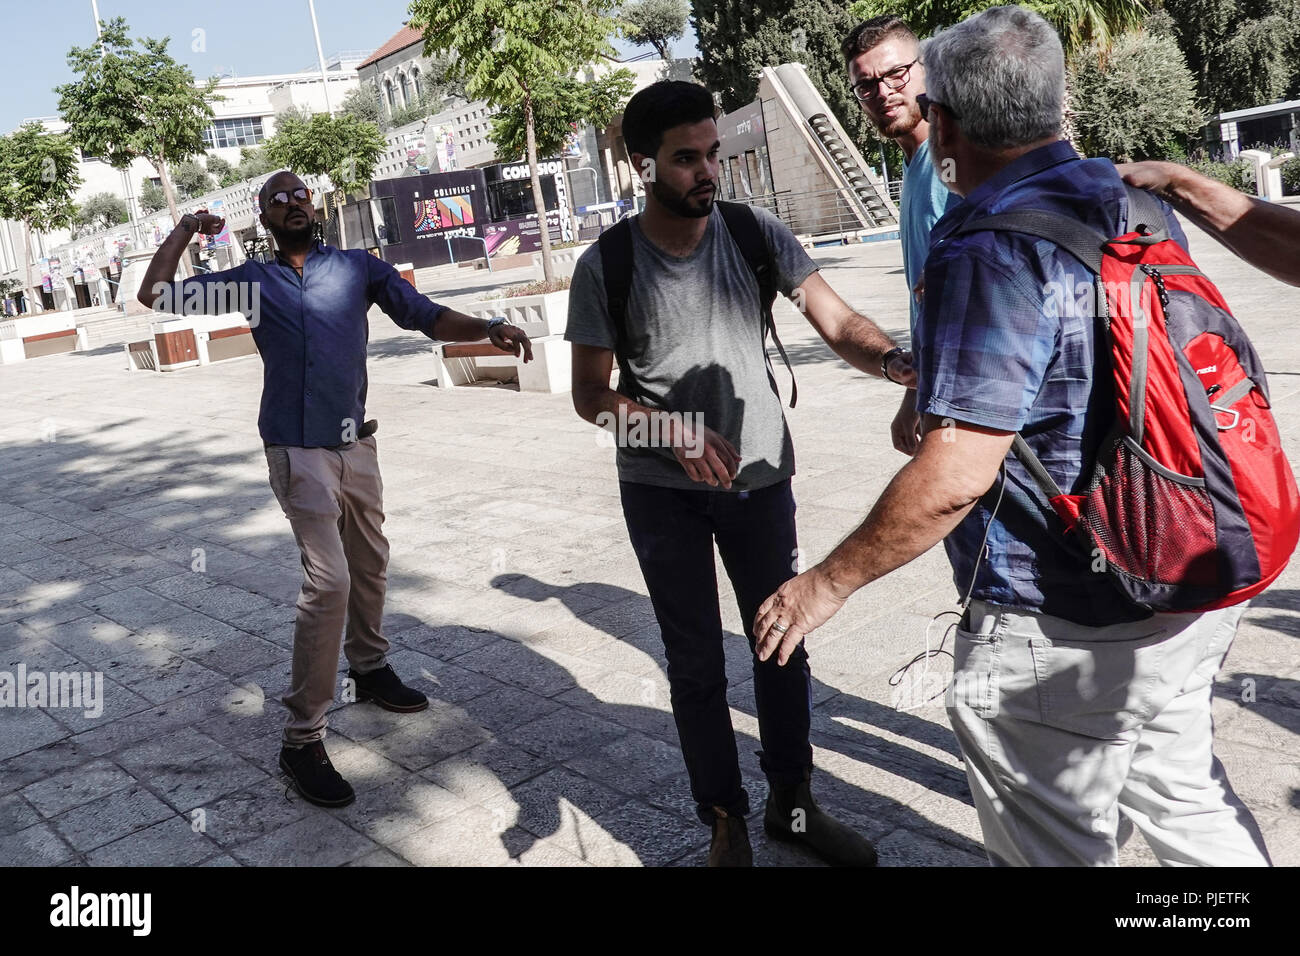 Jerusalem, Israel. 6th September, 2018. Arab men violently attempt to disrupt a press conference adjacent to City Hall at Safra Square announcing a new Palestinian party 'Al Quds Lana' (Jerusalem is Ours) for municipal elections scheduled for 30th October 2018, pelting participants with eggs as they oppose any type of cooperation with what they consider 'occupying Israeli forces'. li occupat Credit: Nir Alon/Alamy Live News Stock Photo